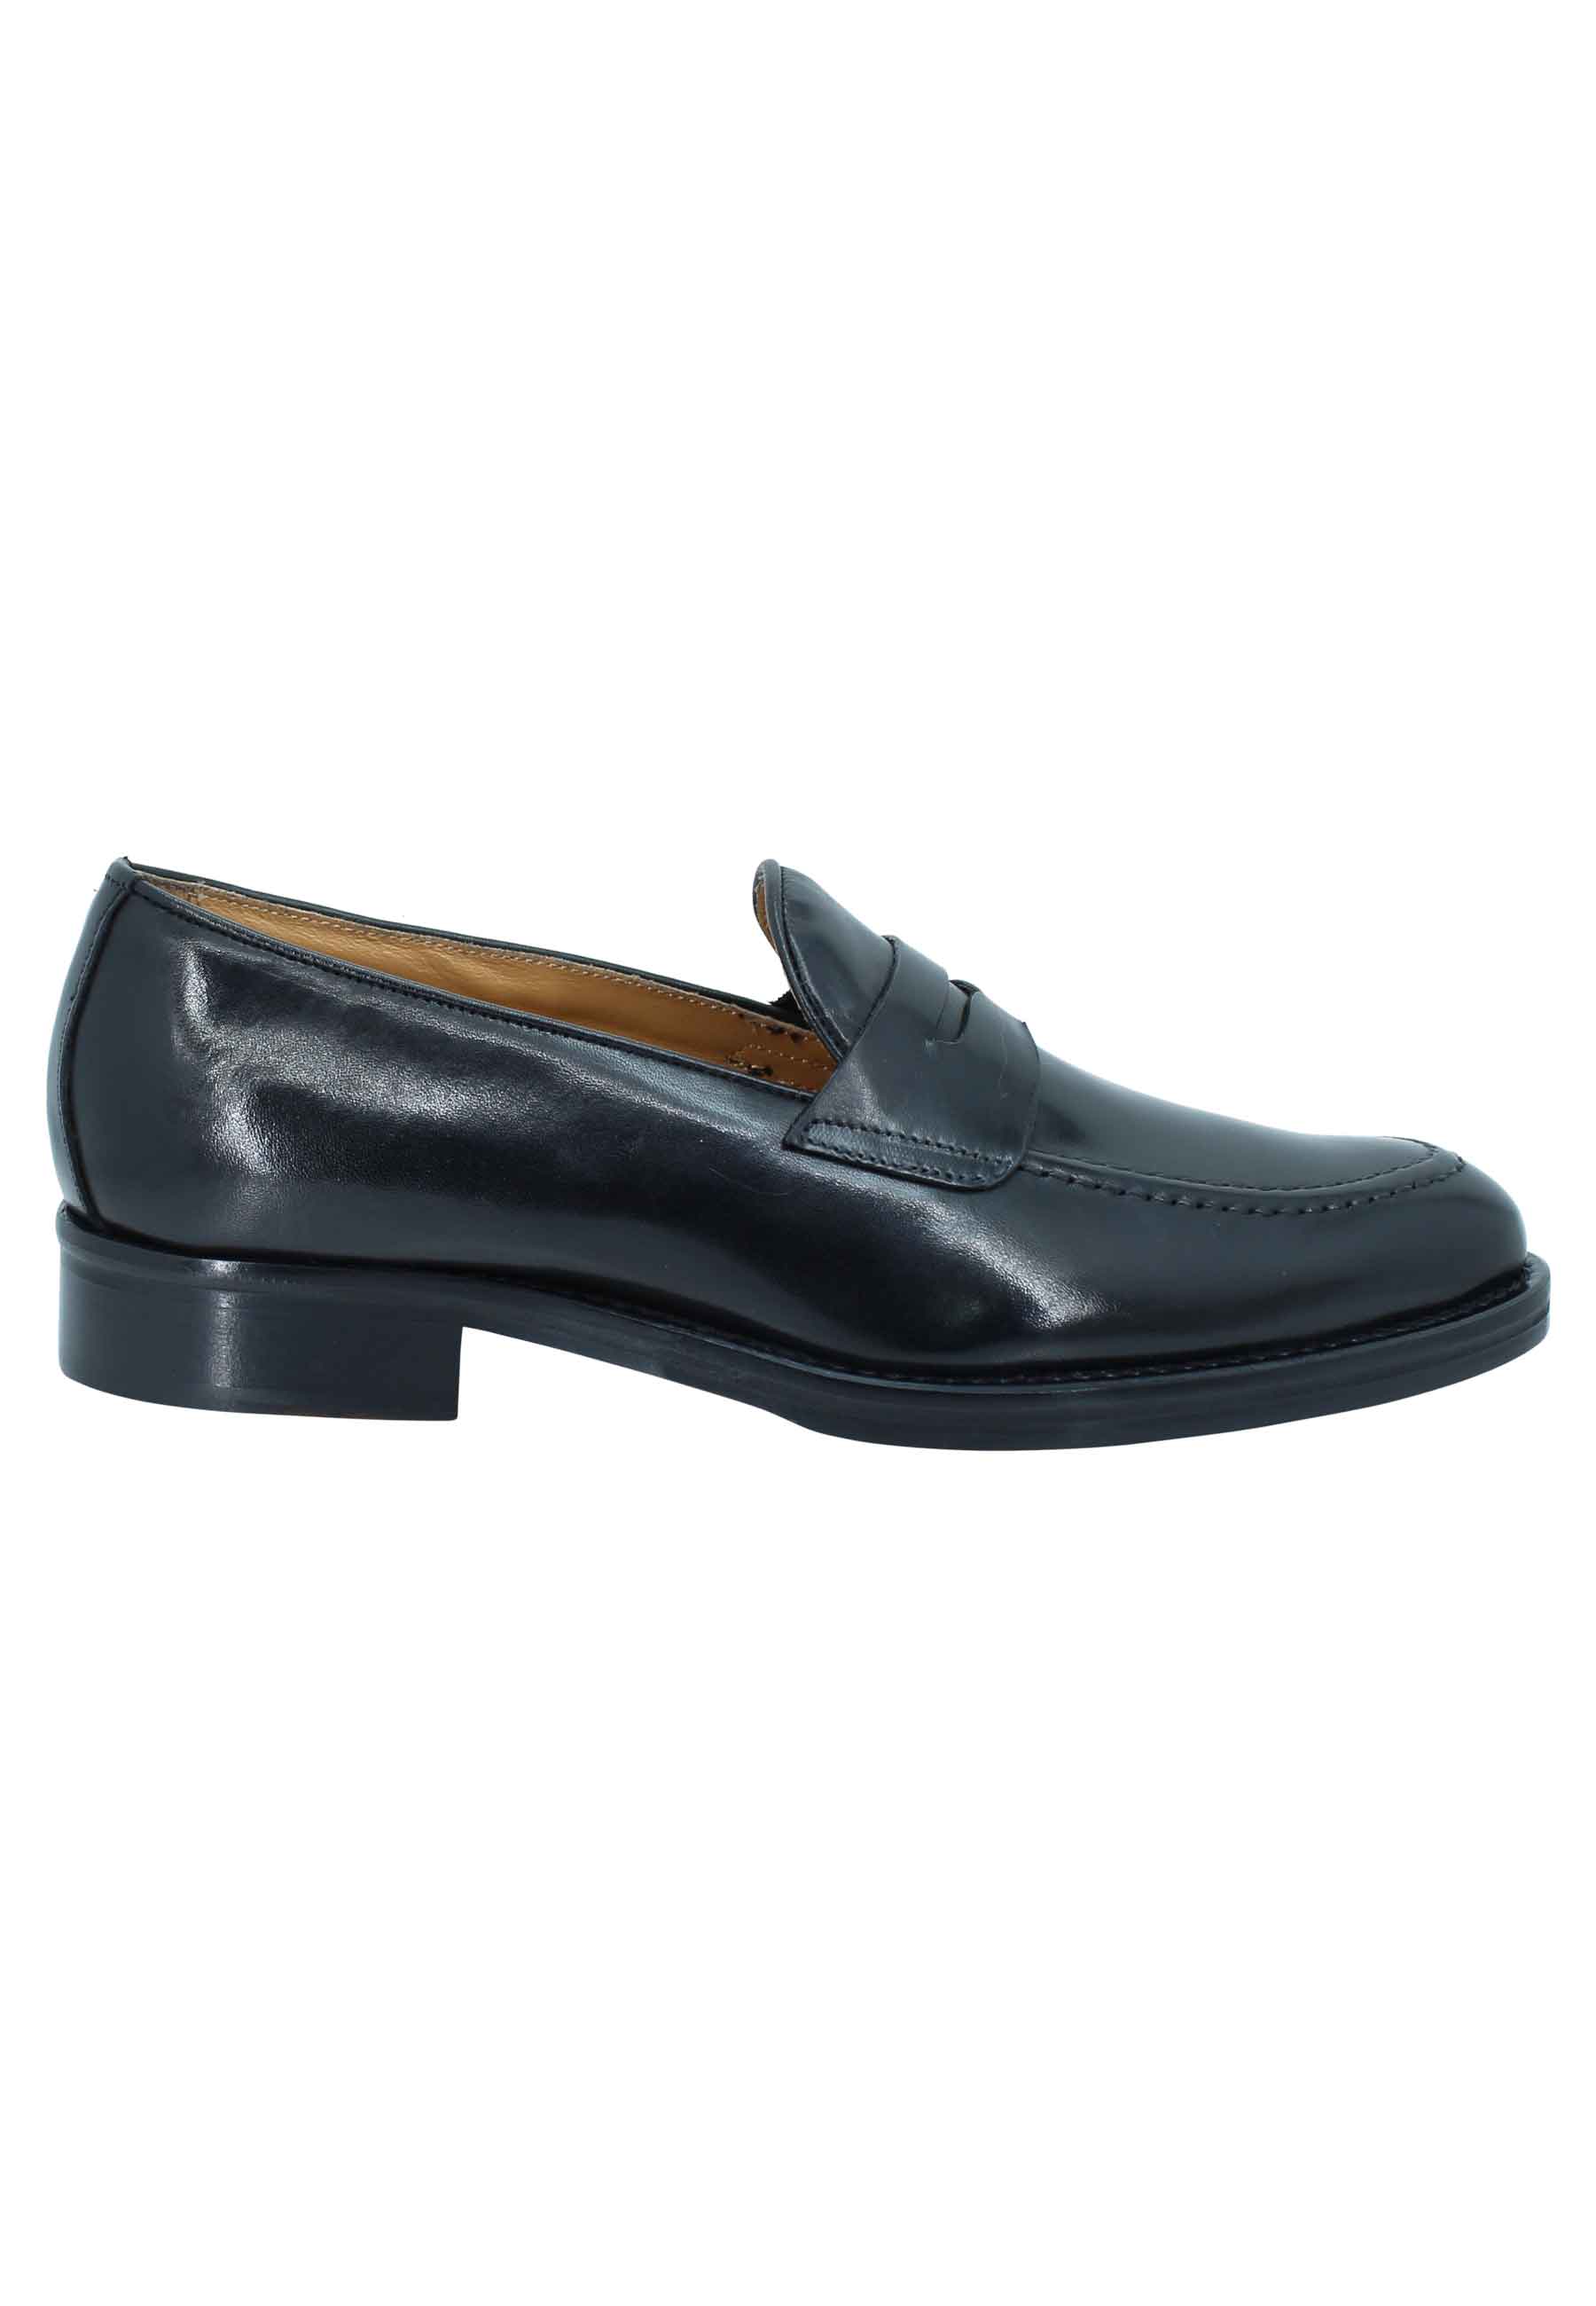 Men's black leather loafers with tapered toe and leather sole